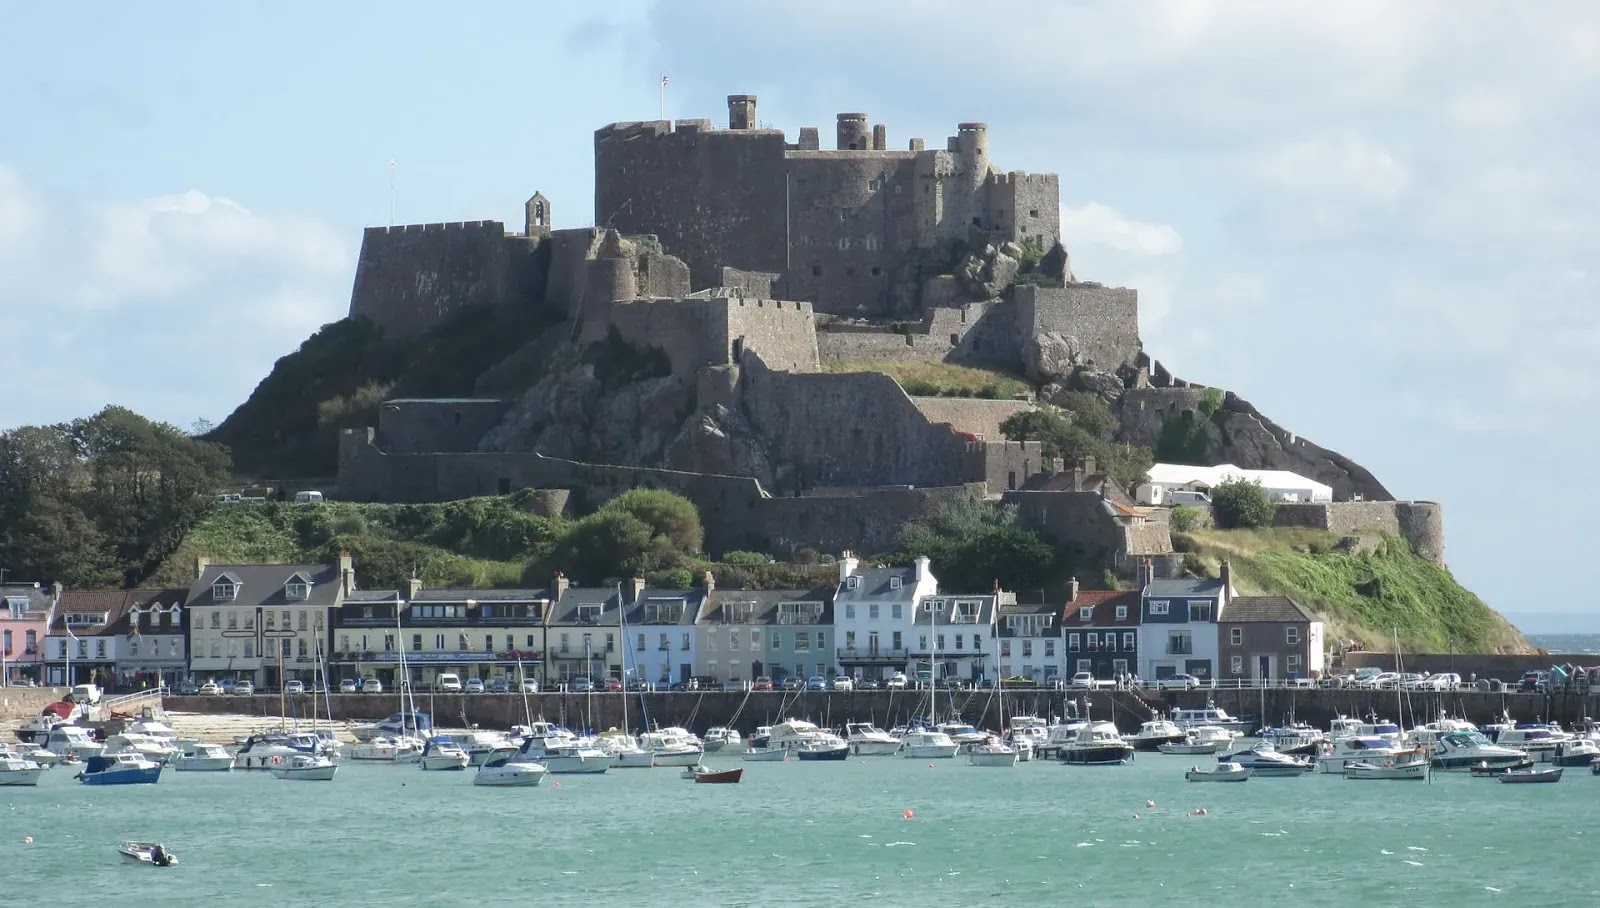 Mount Orgueil from the south